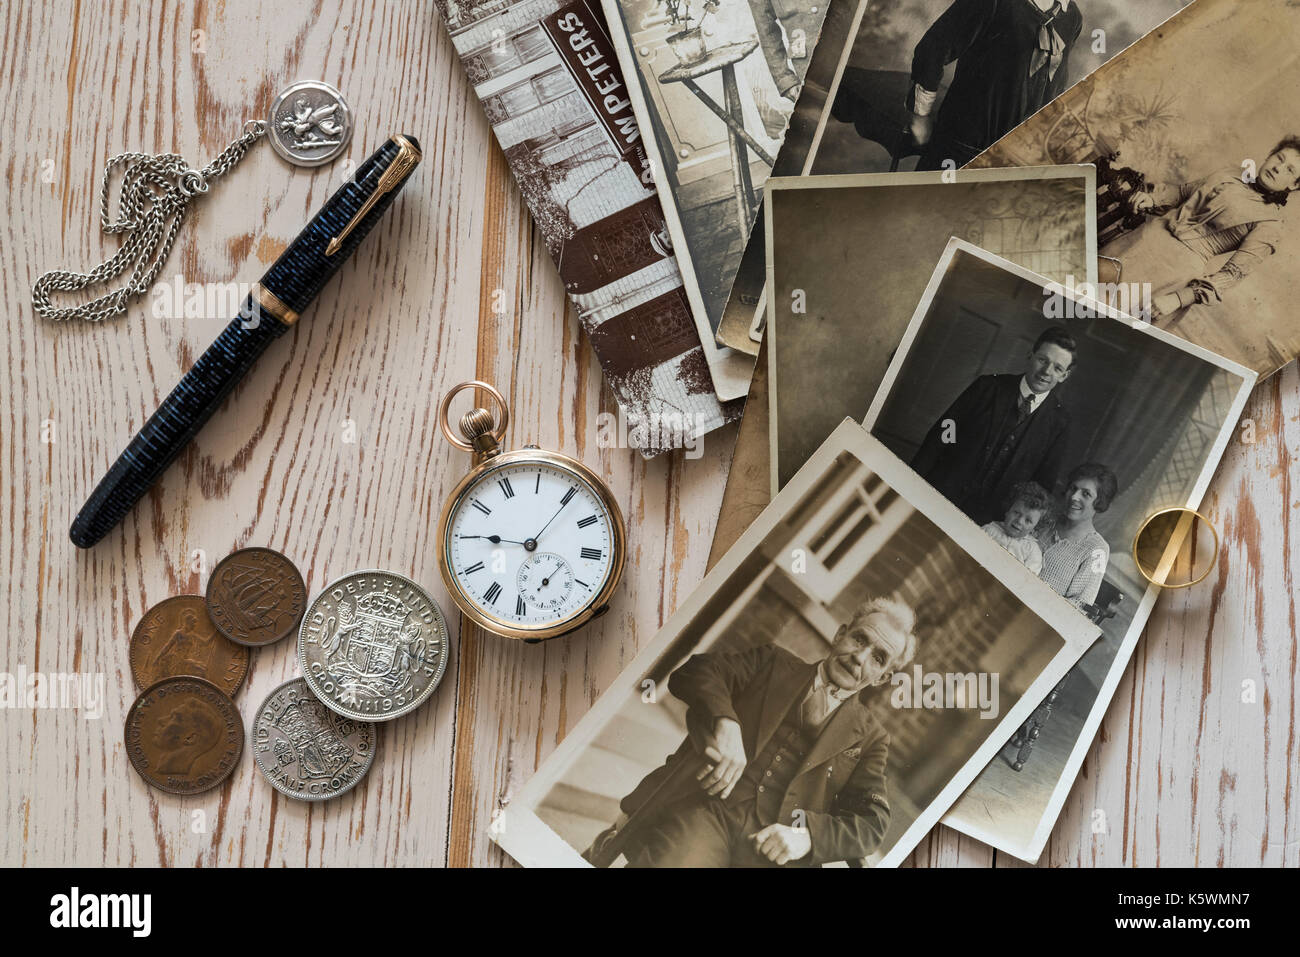 Old family photographs and some collectable items. Nostalgia, memories. Stock Photo